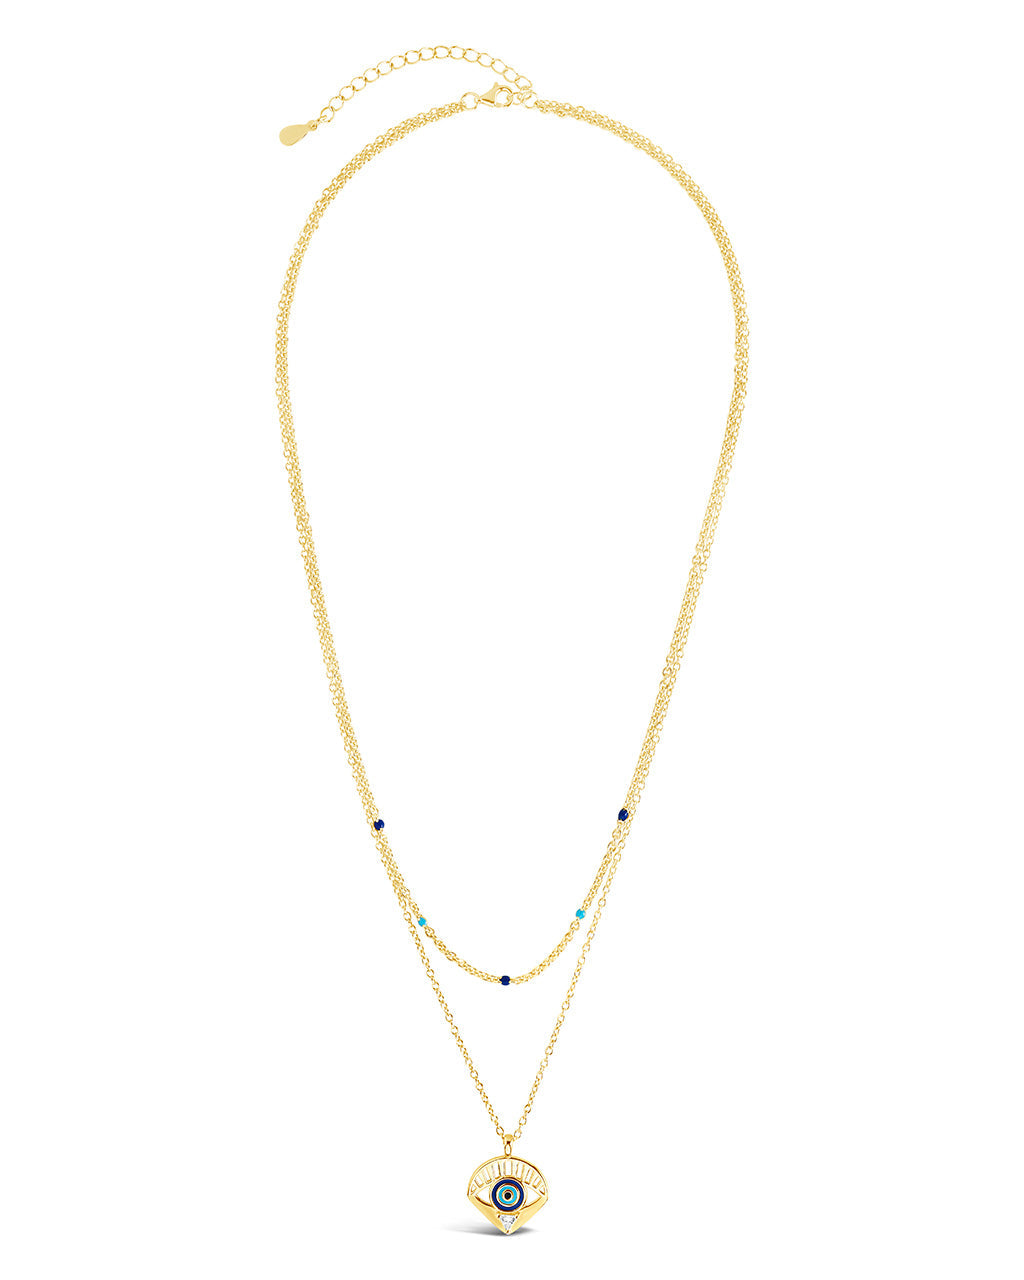 Alessandra Layered Necklace Necklace Sterling Forever 